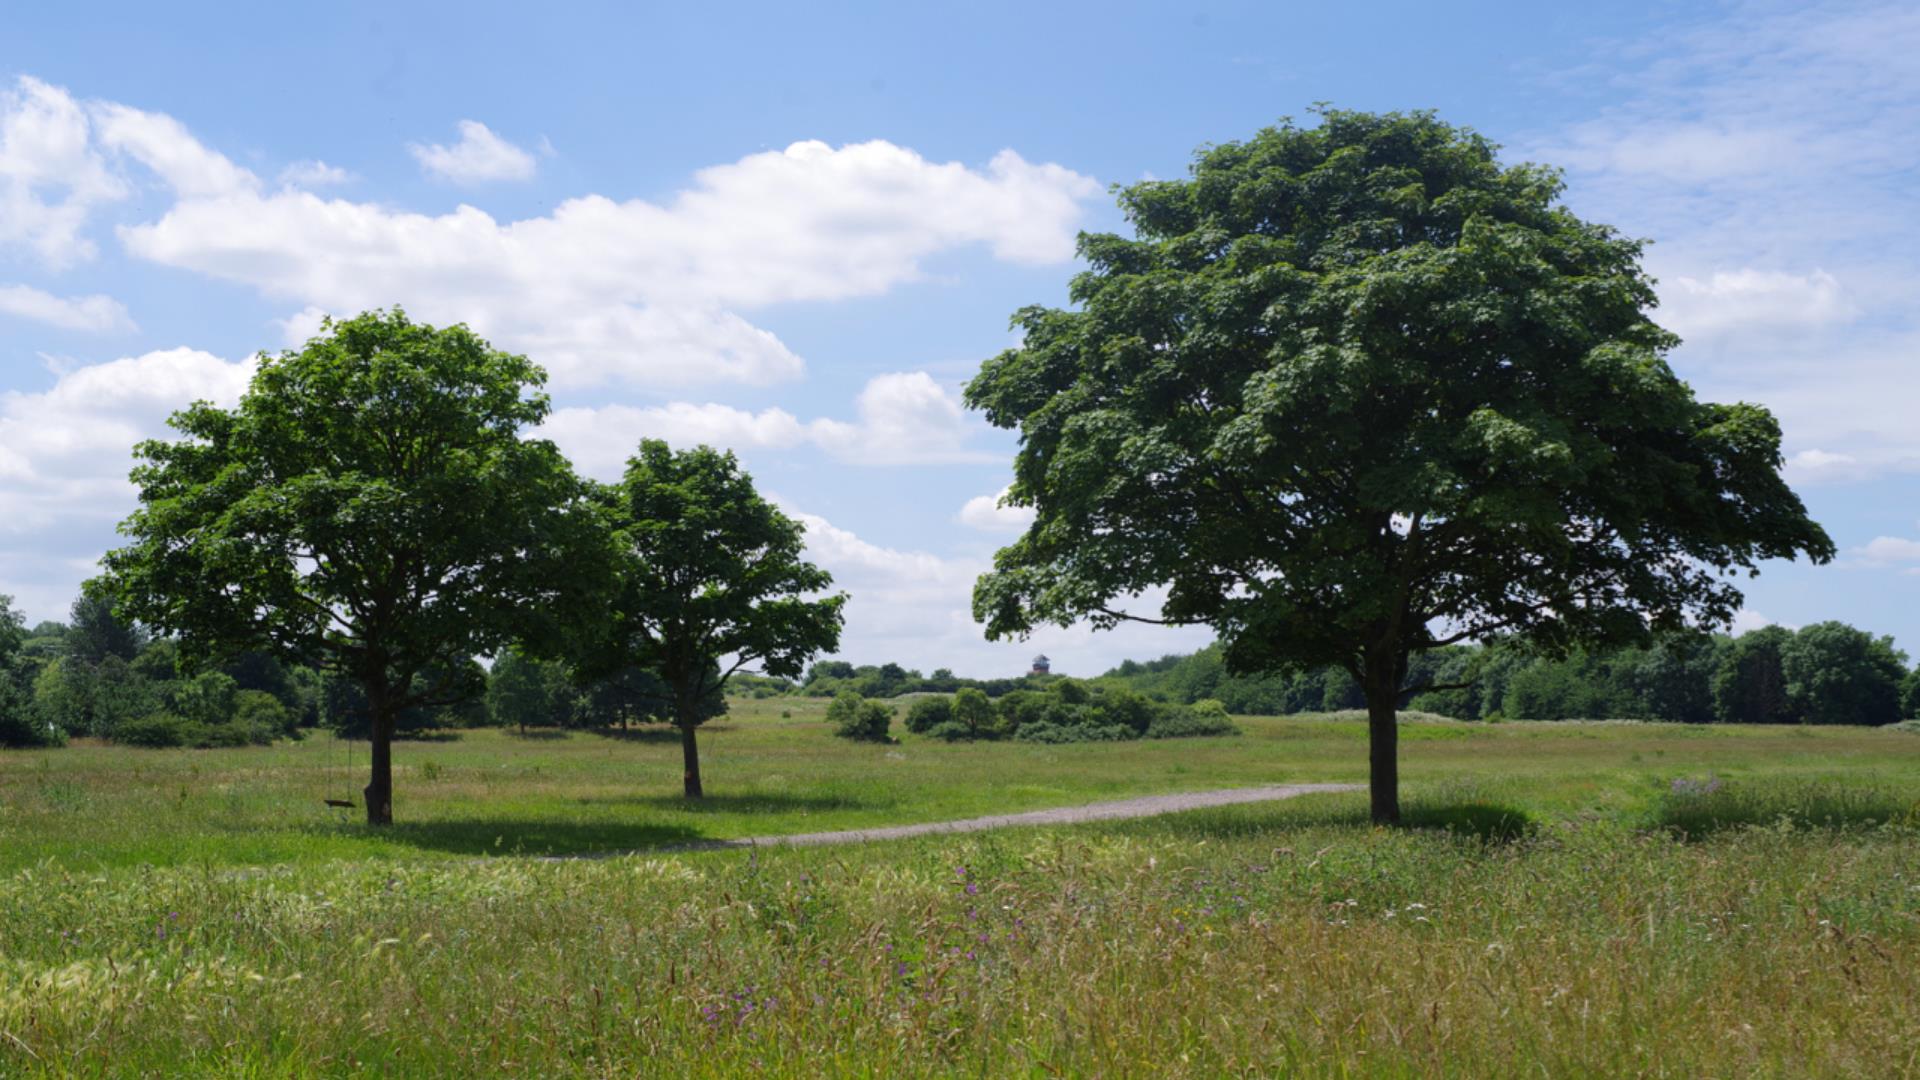 Beautiful trees and lush green grass on Woolwich Common.